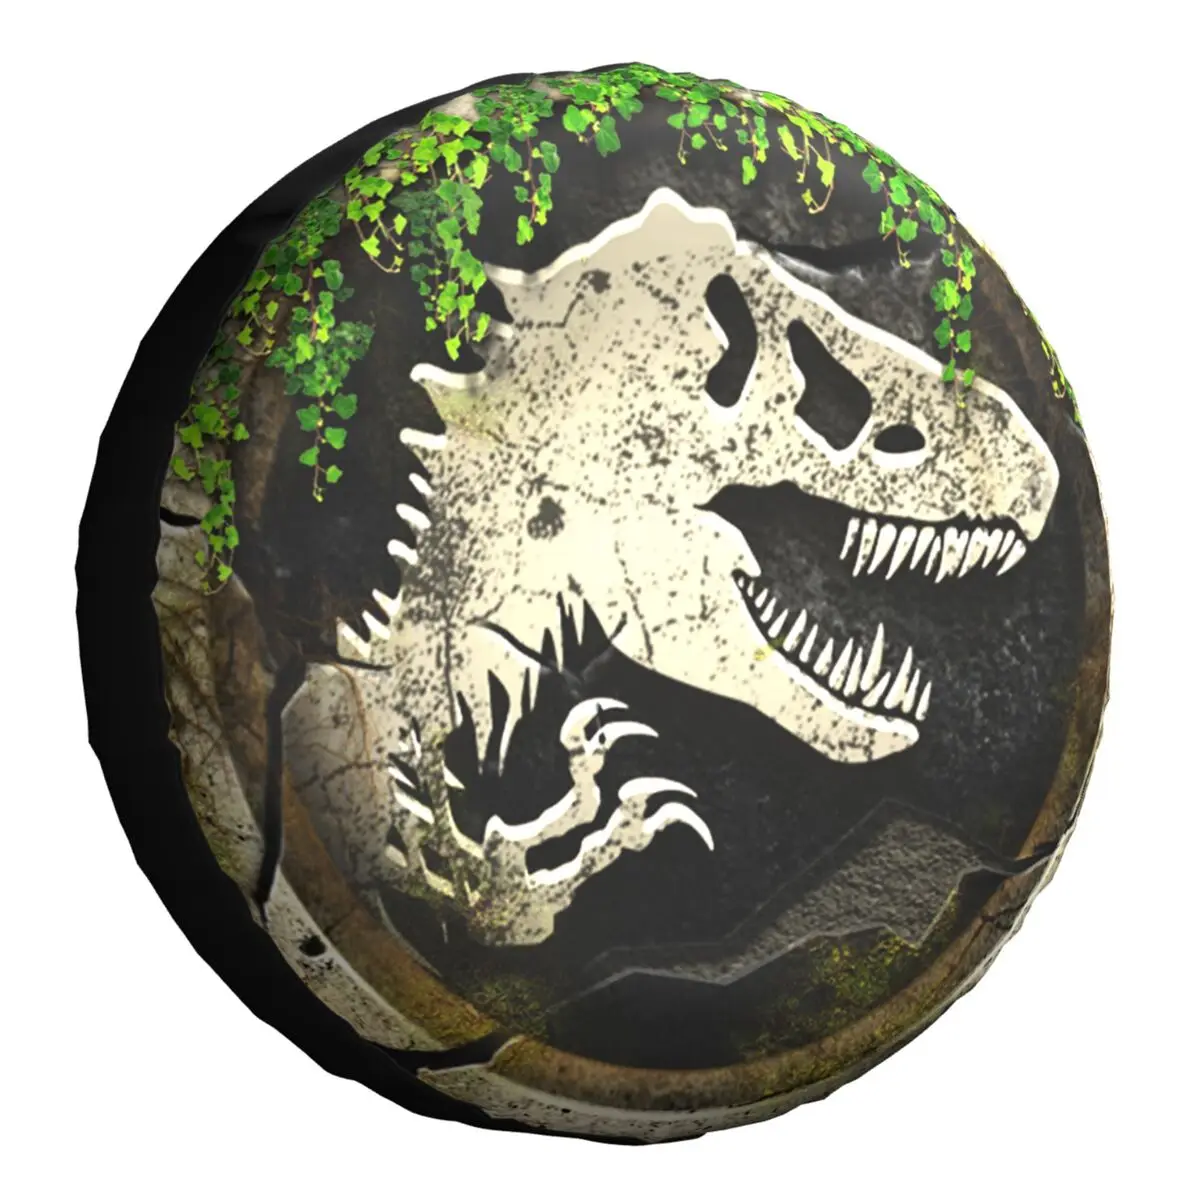 

Jurassic Tire Cover 4WD 4x4 Trailer Dinosaur Print Spare Wheel Protector Universal Fit for Jeep Toyota 14" 15" 16" 17" Inch